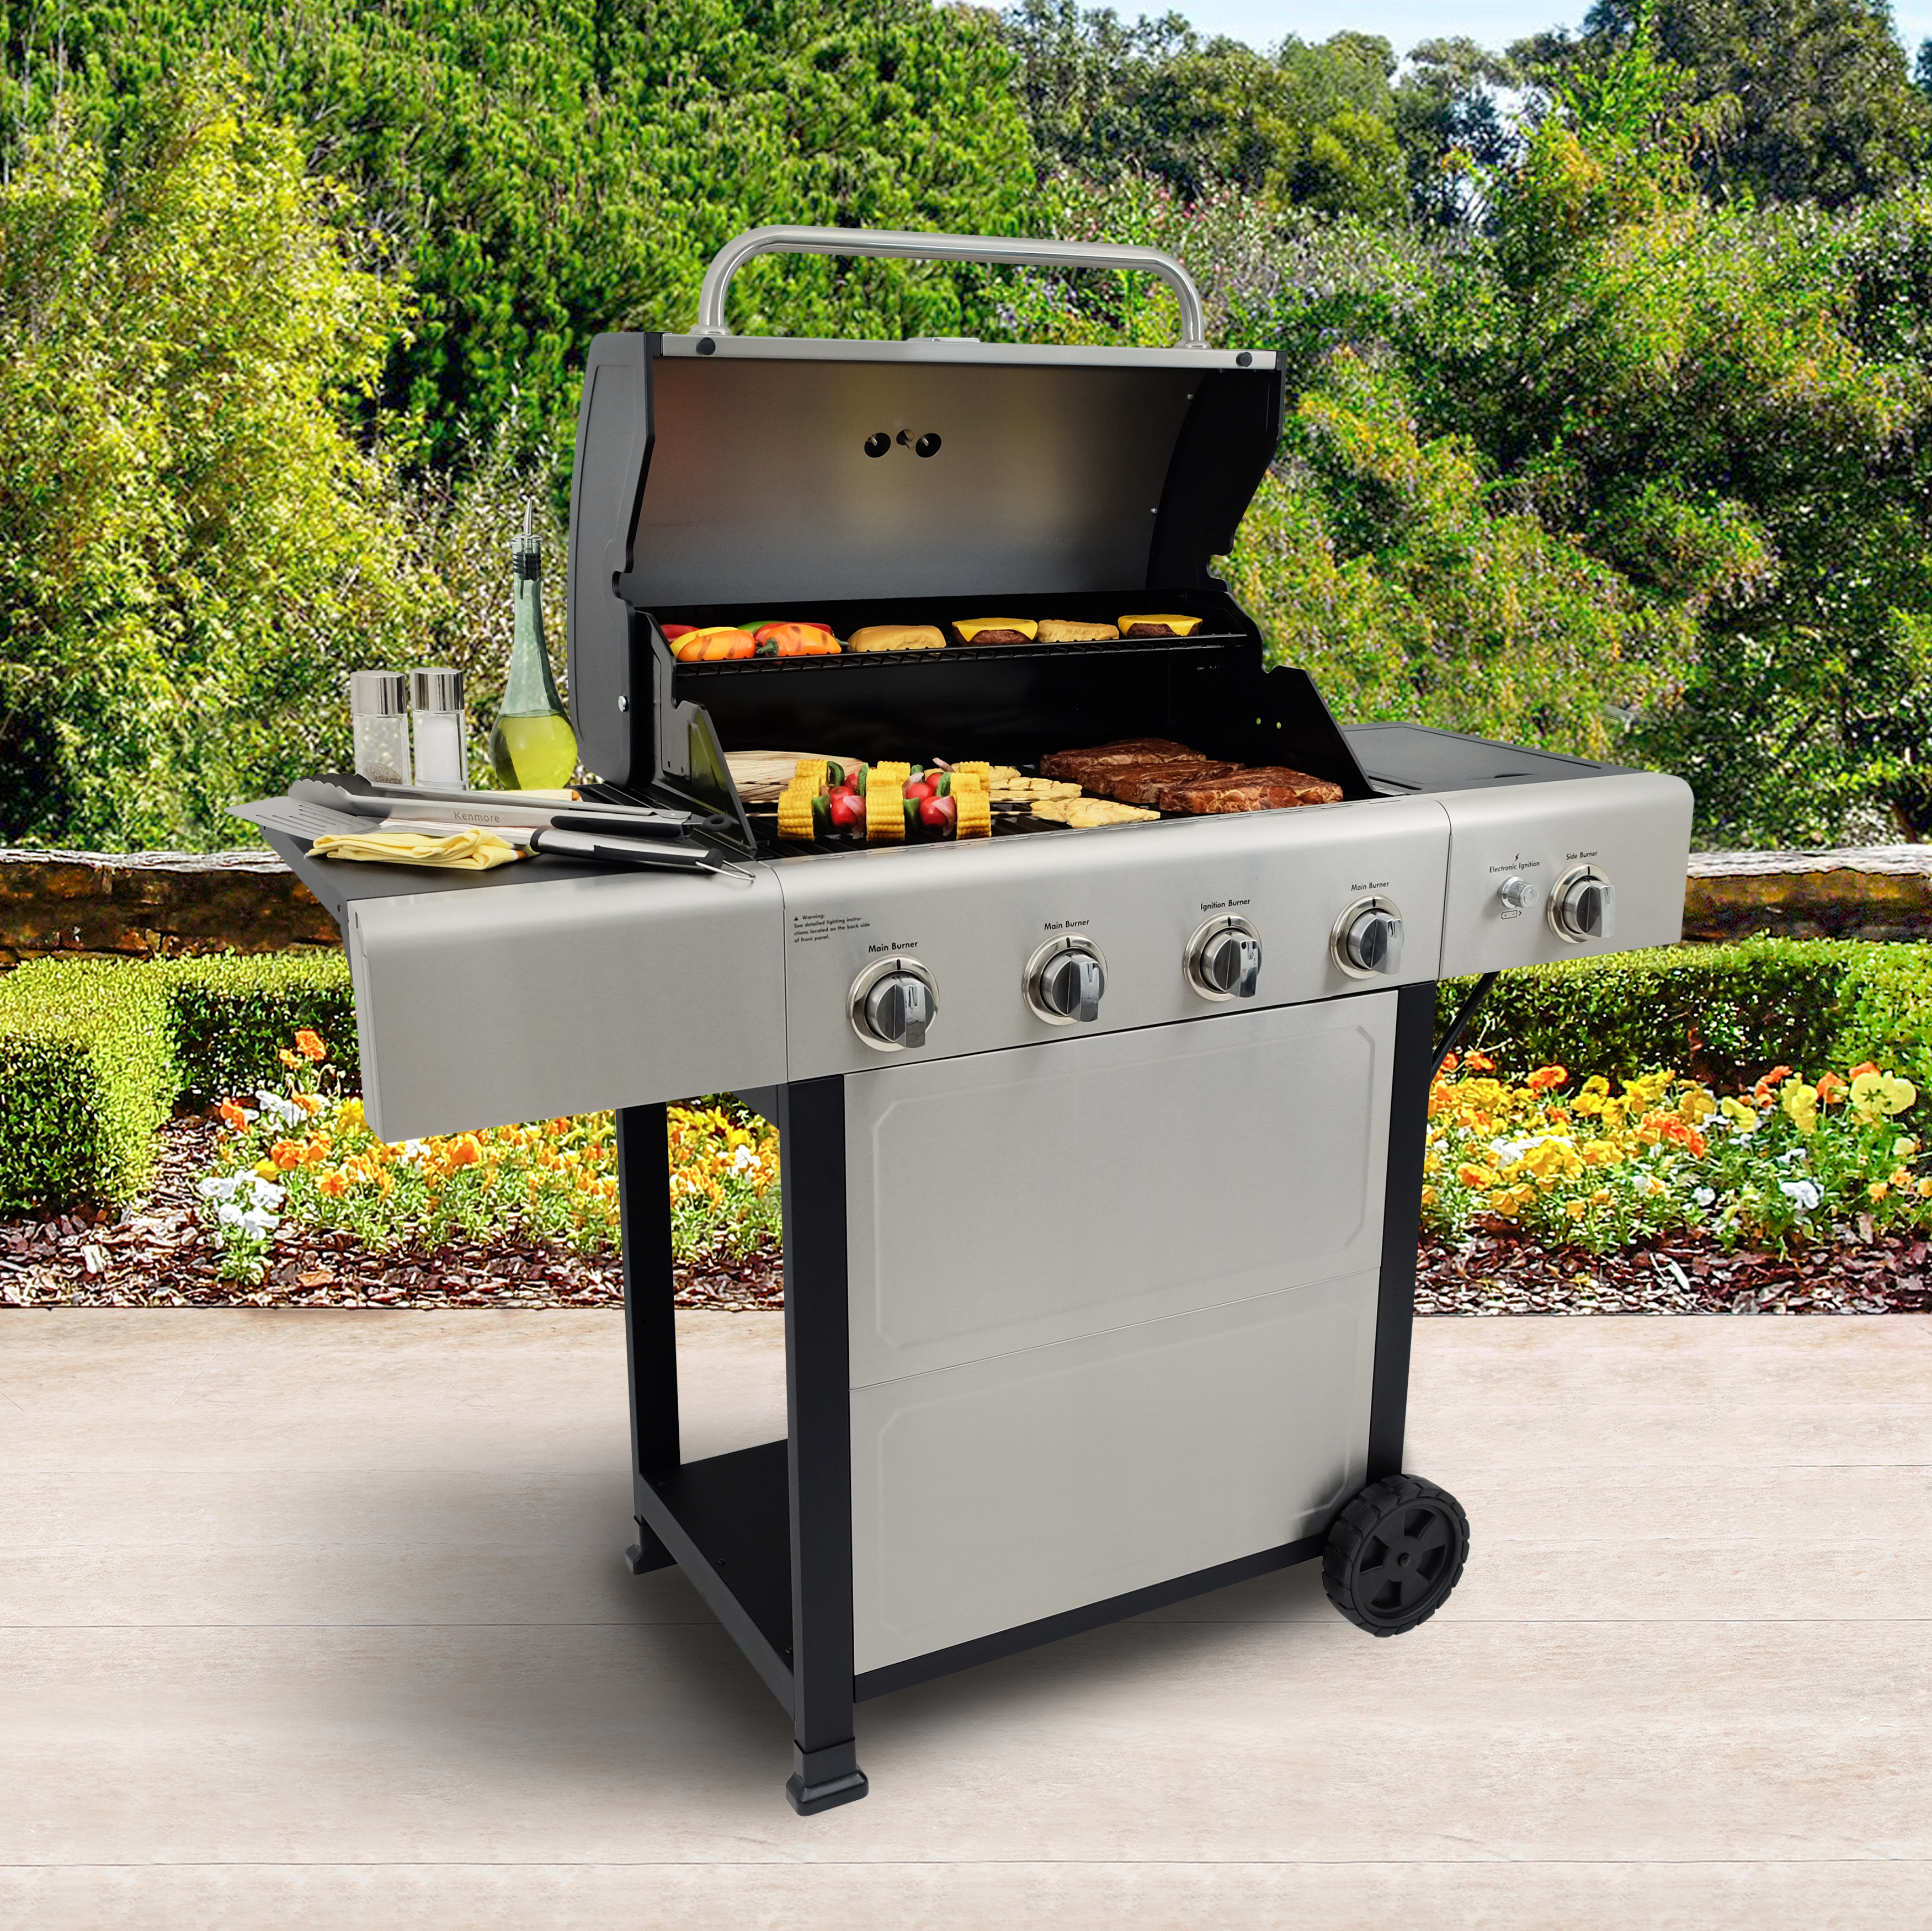 Kenmore 4-Burner Outdoor Propane Gas Grill with Side Burner, Open Cart, Stainless Steel - image 3 of 13